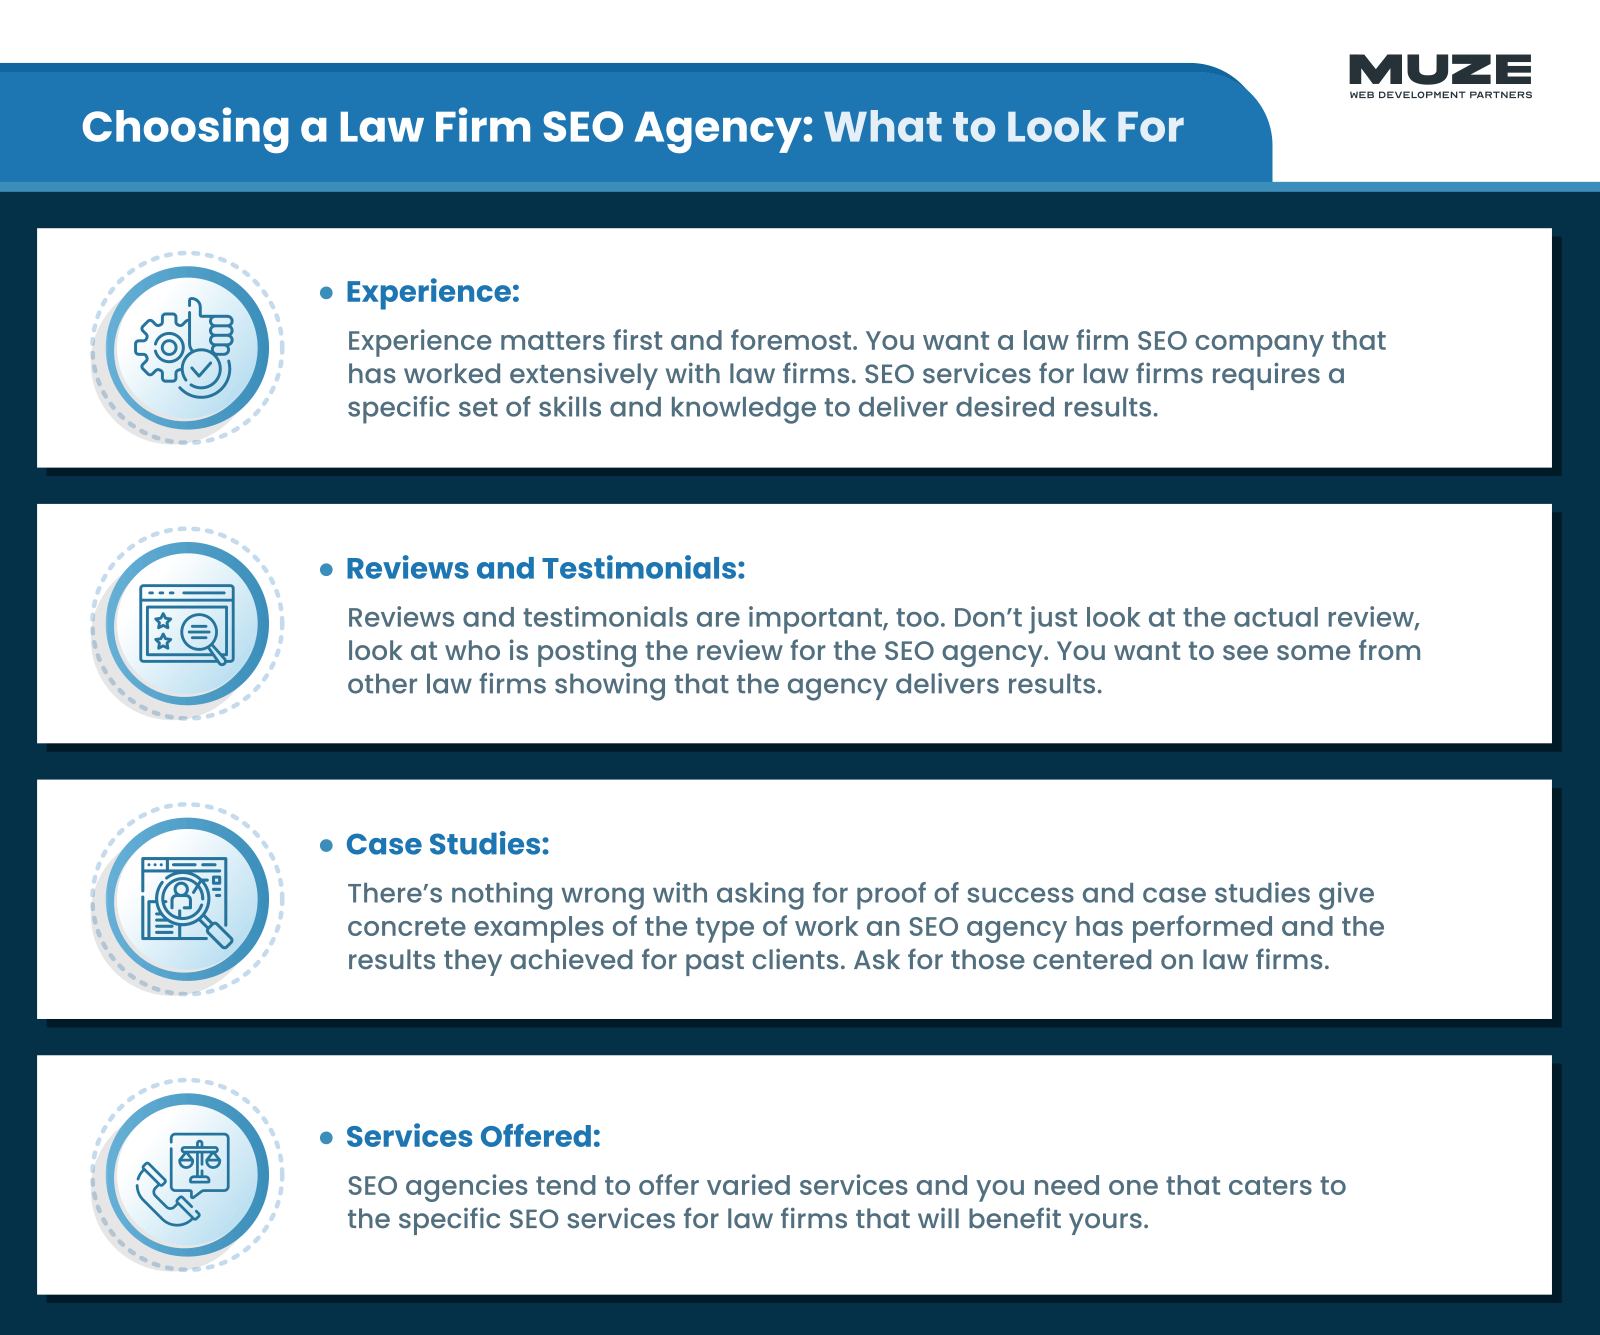 Choosing a Law Firm SEO Agency - Law Firm SEO Services